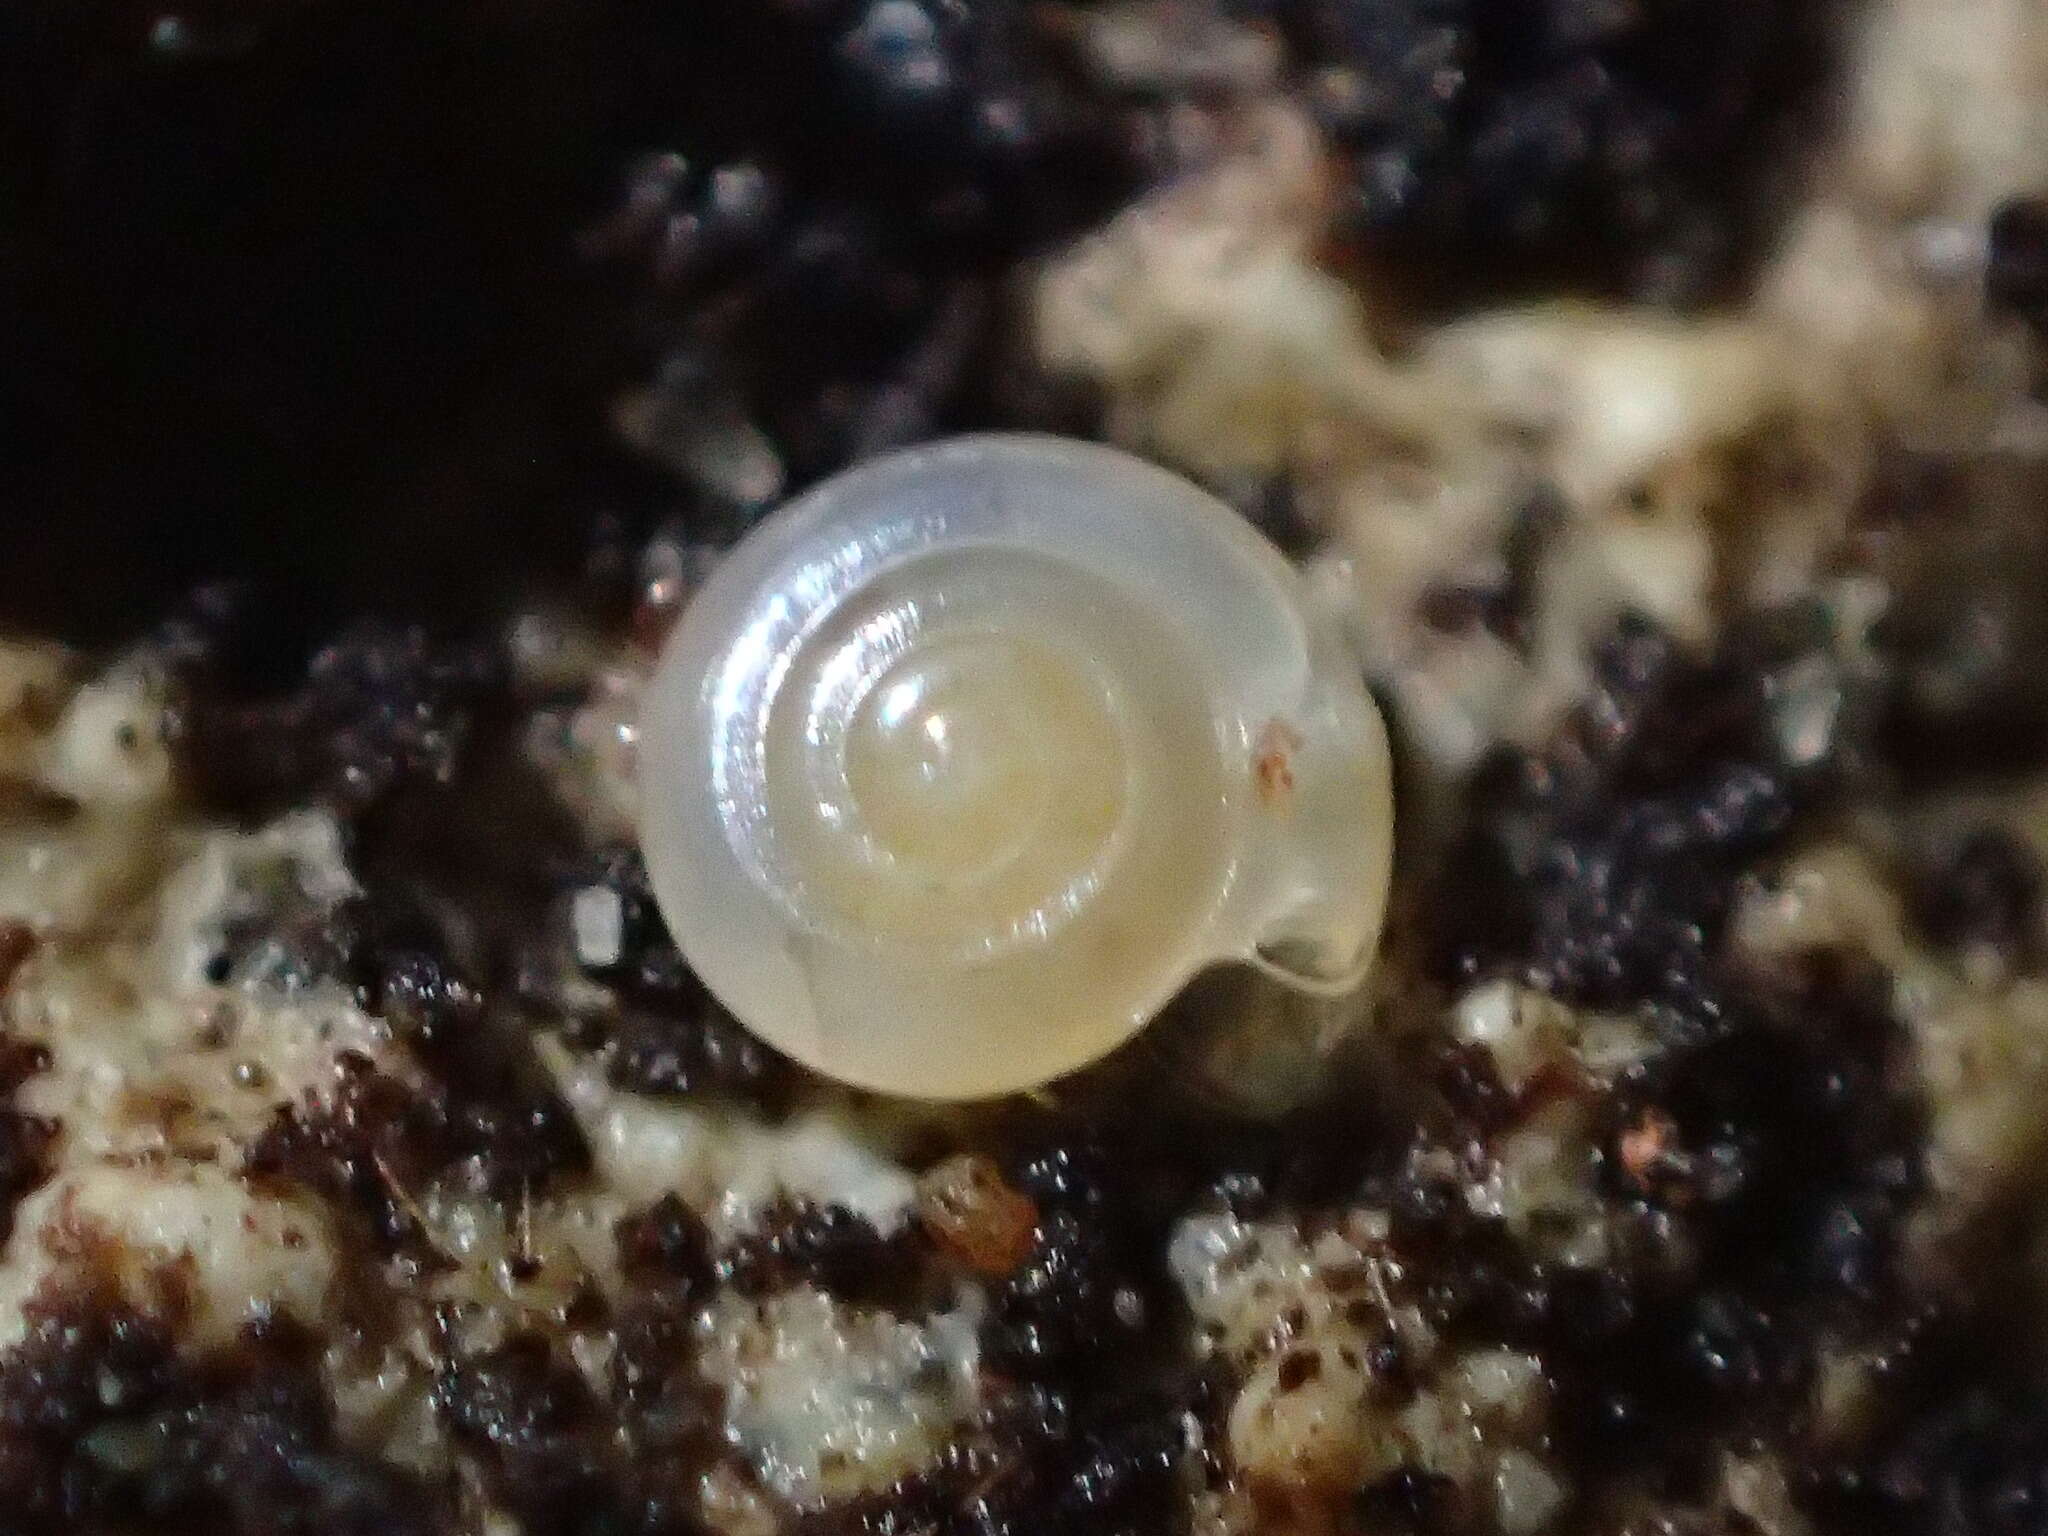 Image of milky crystal snail